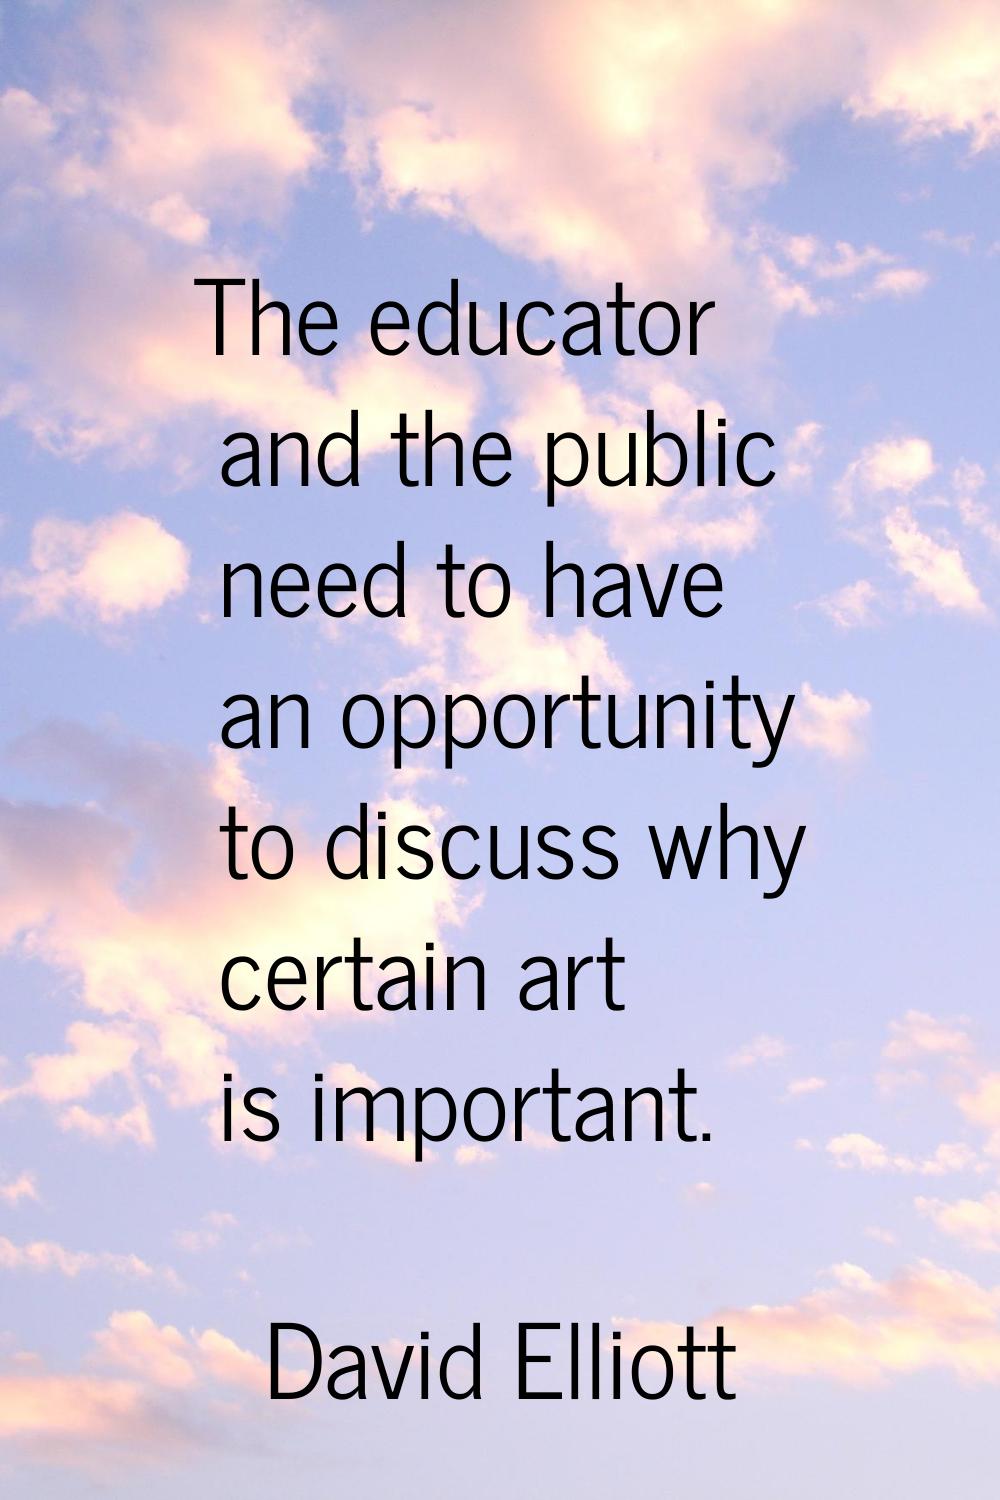 The educator and the public need to have an opportunity to discuss why certain art is important.